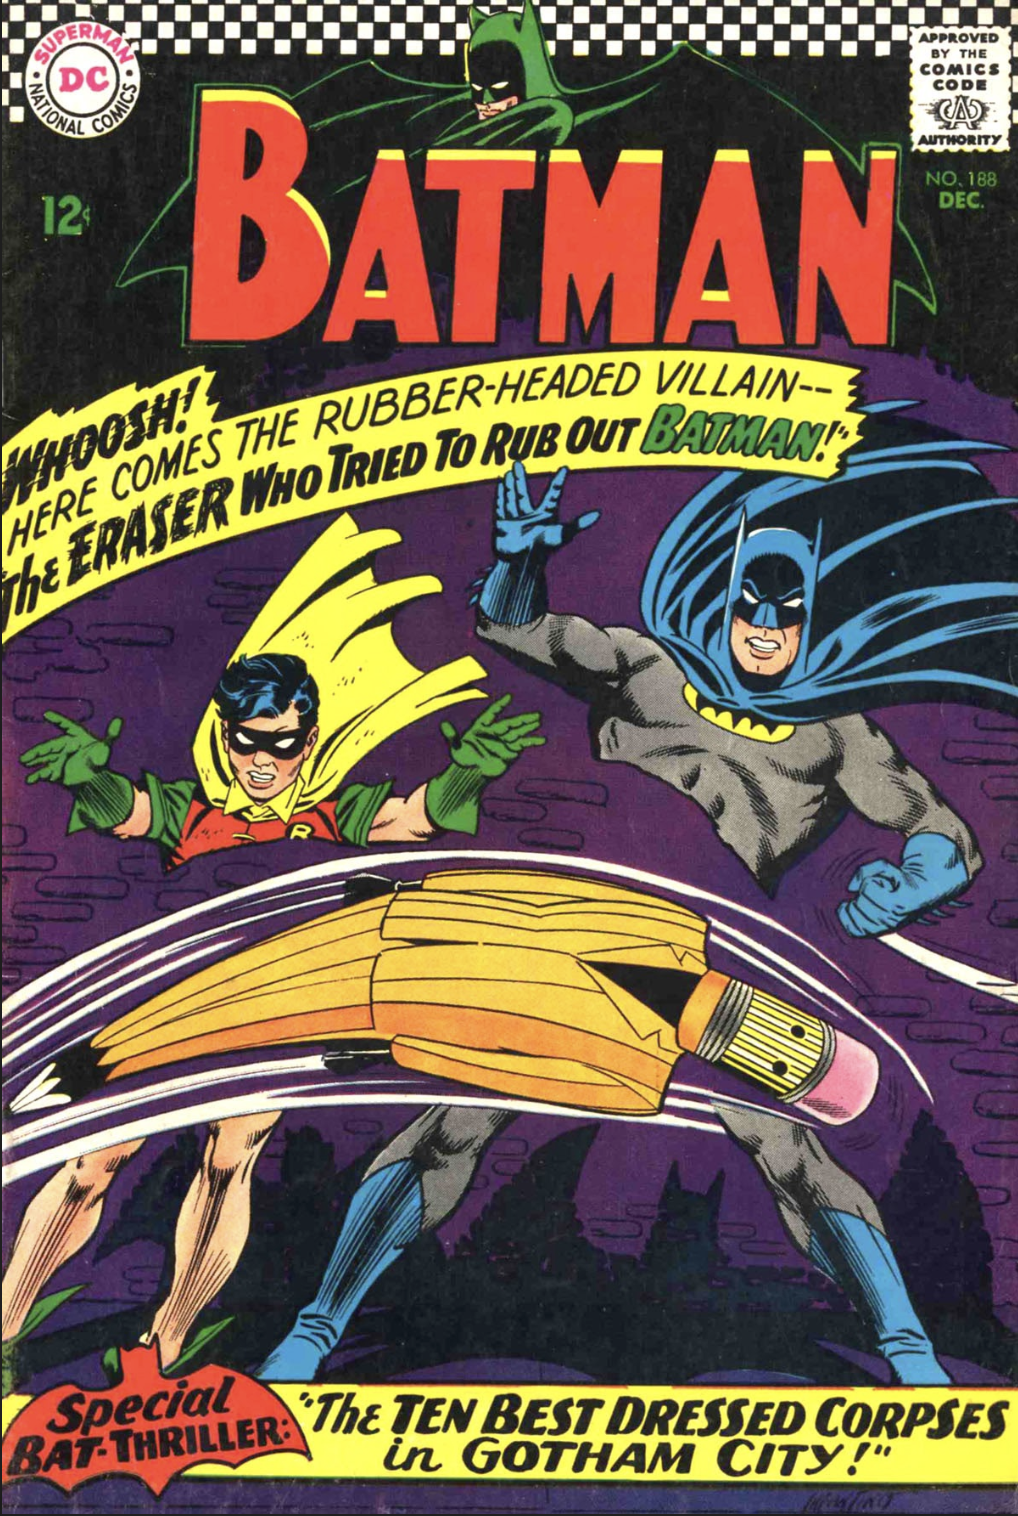 The cover of Batman #188, where a man dressed like a giant pencil is literally erasing Batman and Robin.